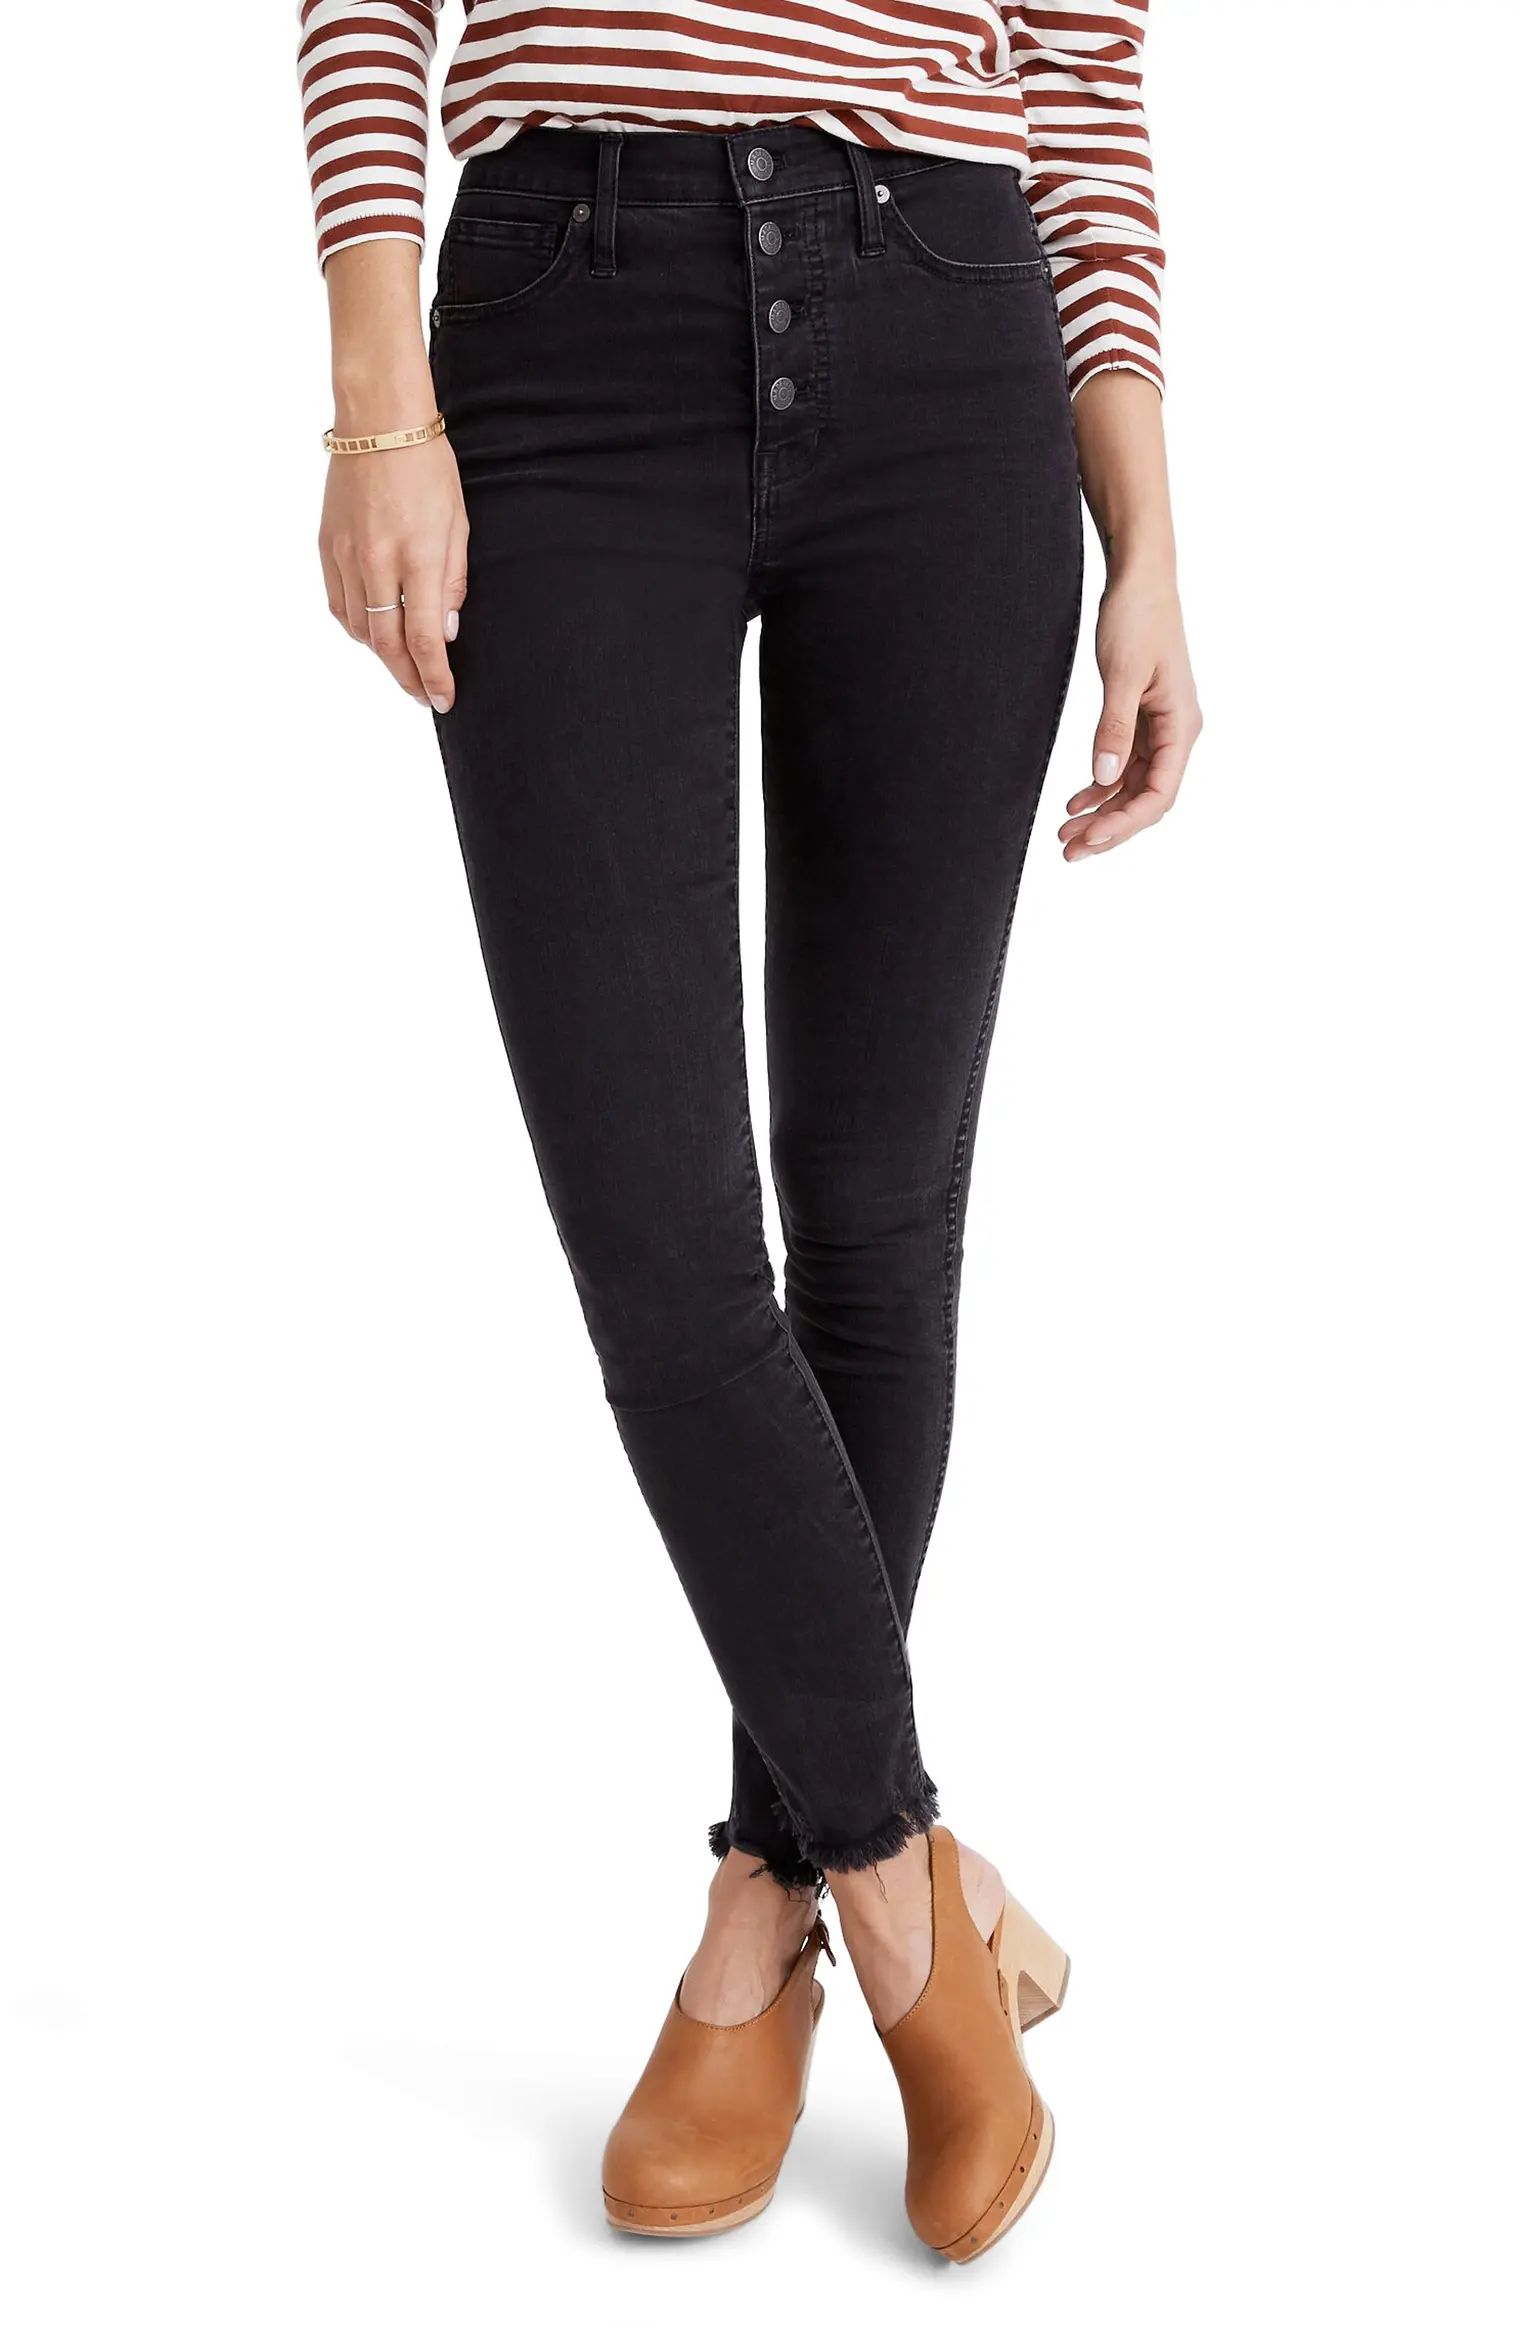 10-Inch High Waist Skinny Jeans Button-Through Edition | Nordstrom